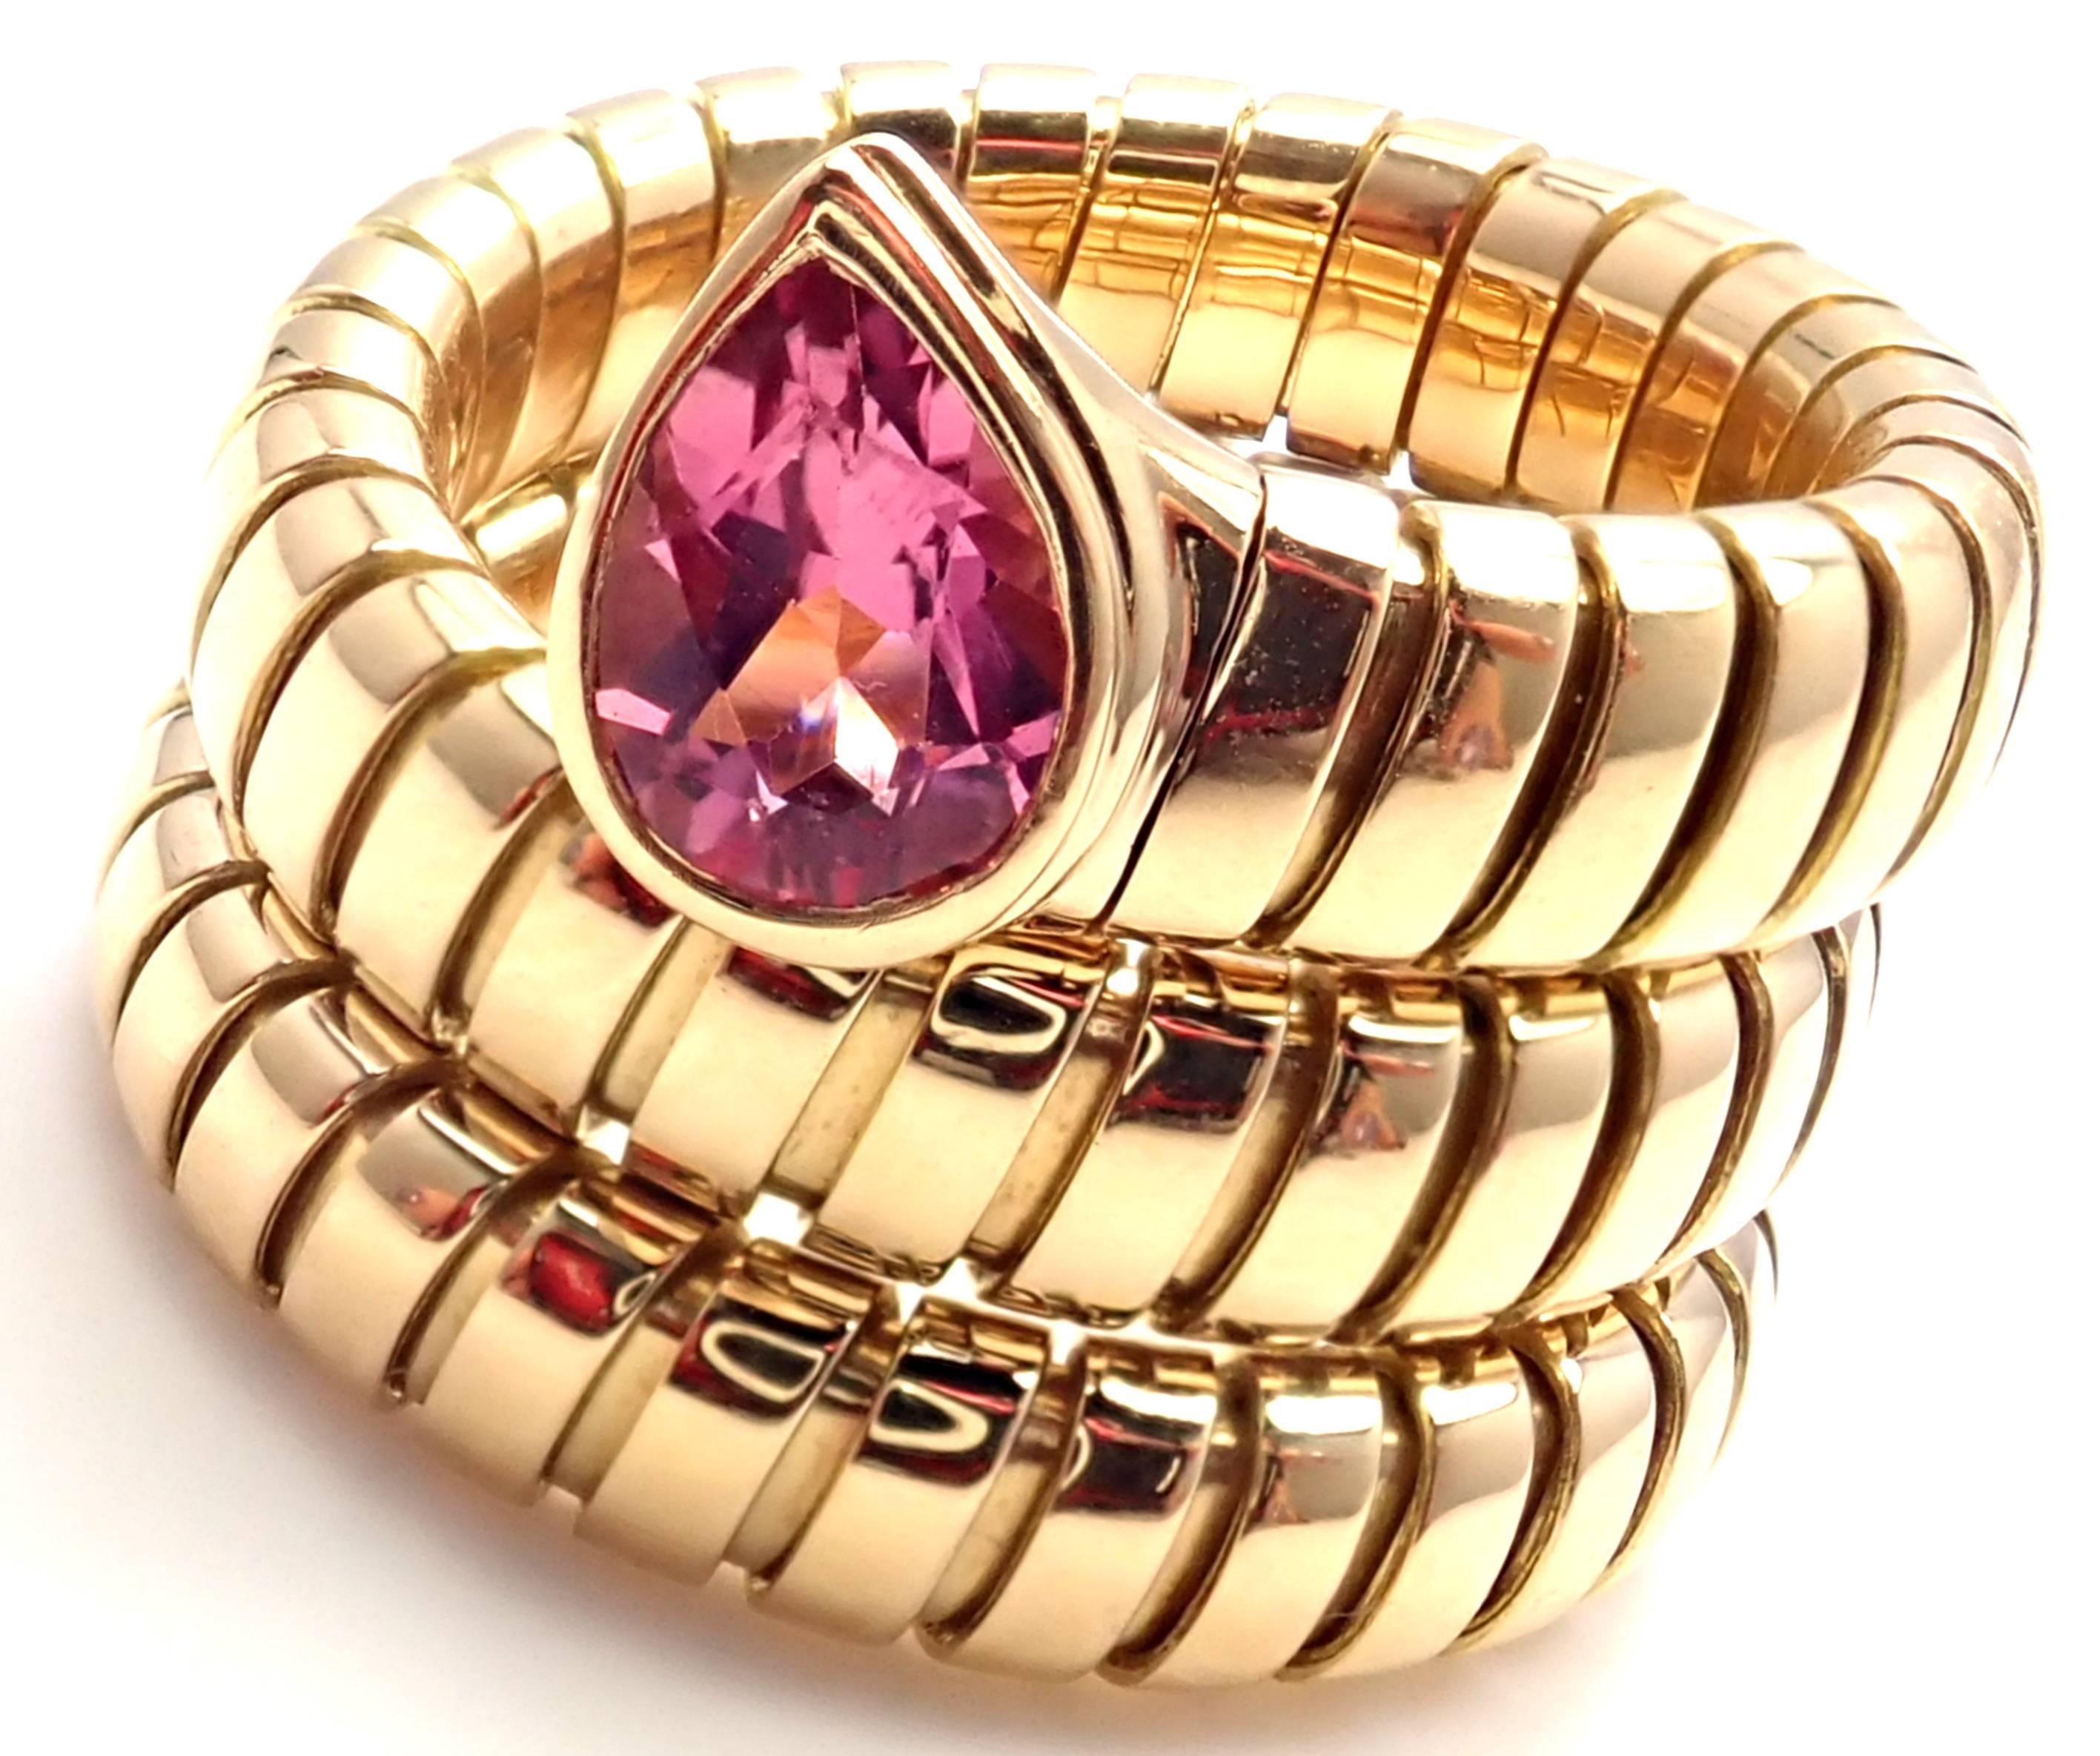 18k Yellow Gold Pink Tourmaline Coil Snake Band Ring by Bulgari. 
With 1 pear shape pink tourmaline stone: 6mm x 4mm.
Details:
Ring Size: 6-6.5 (the ring stretches)
Width: 18mm
Weight: 15.6 grams
Stamped Hallmarks:  Bvlgari 750 
*Free Shipping